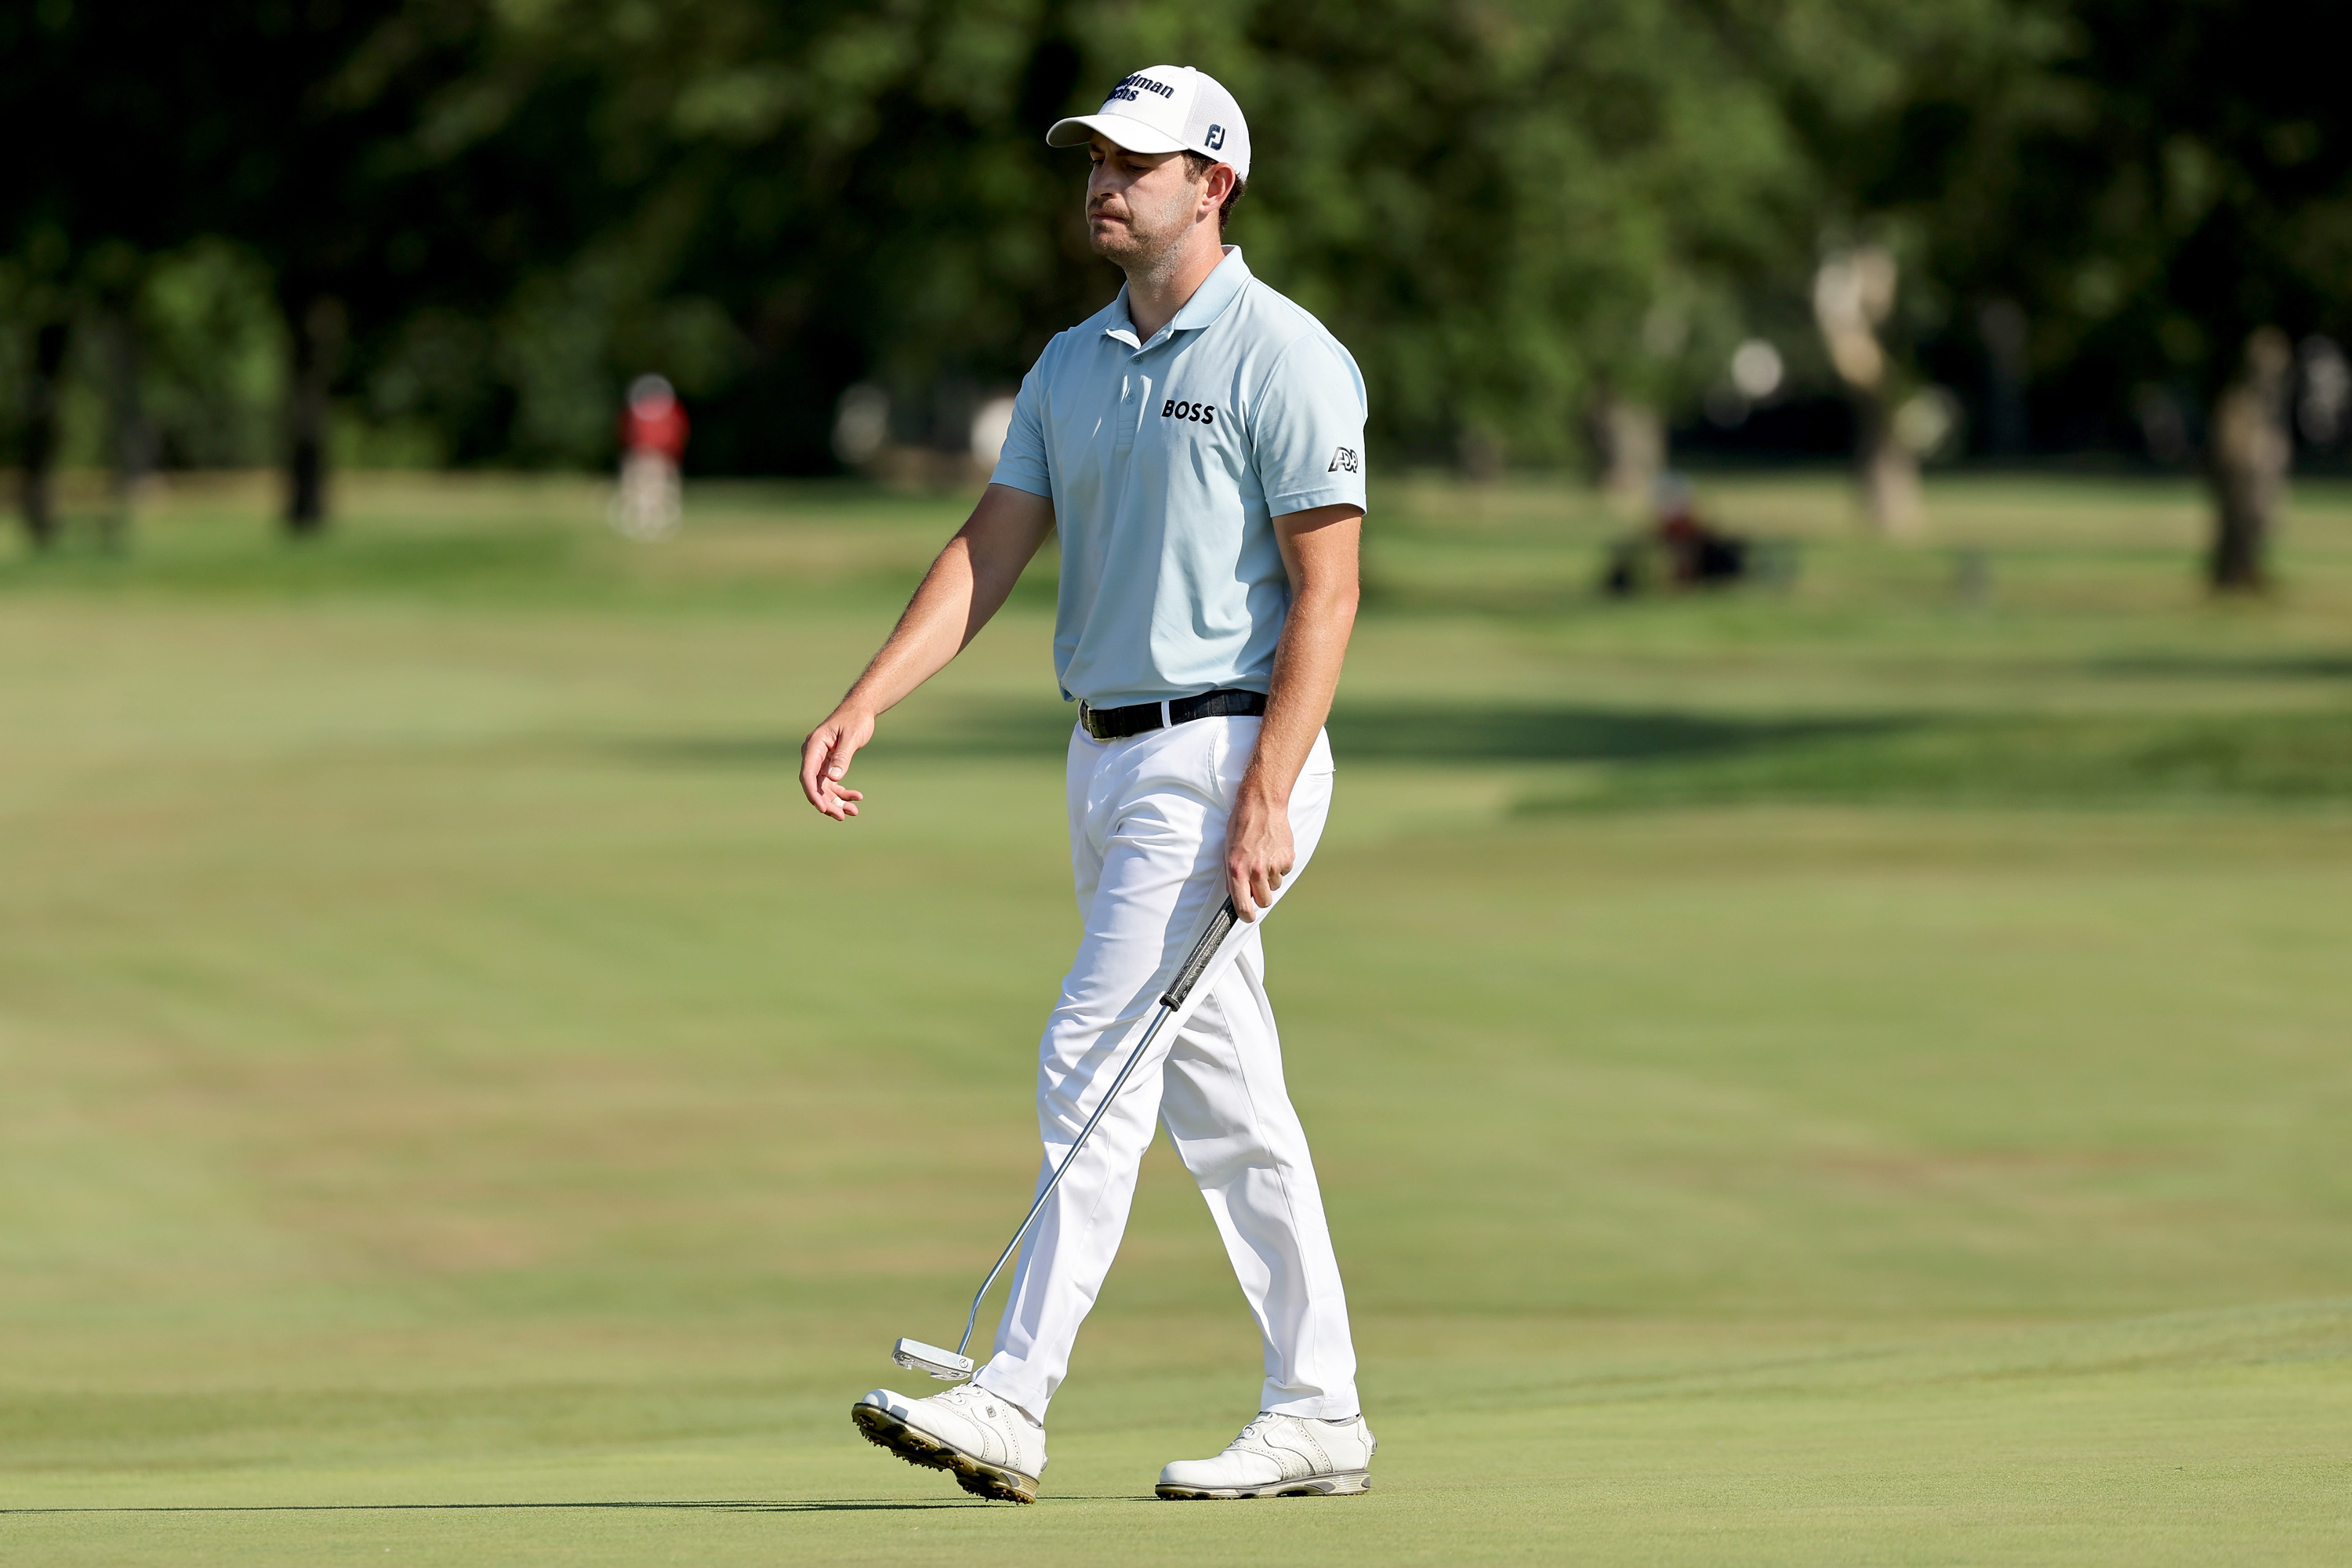 Patrick Cantlay of the United States reacts after missing a putt on the 17th green during the final round of the Rocket Mortgage Classic at Detroit Golf Club on July 31, 2022 in Detroit, Michigan.